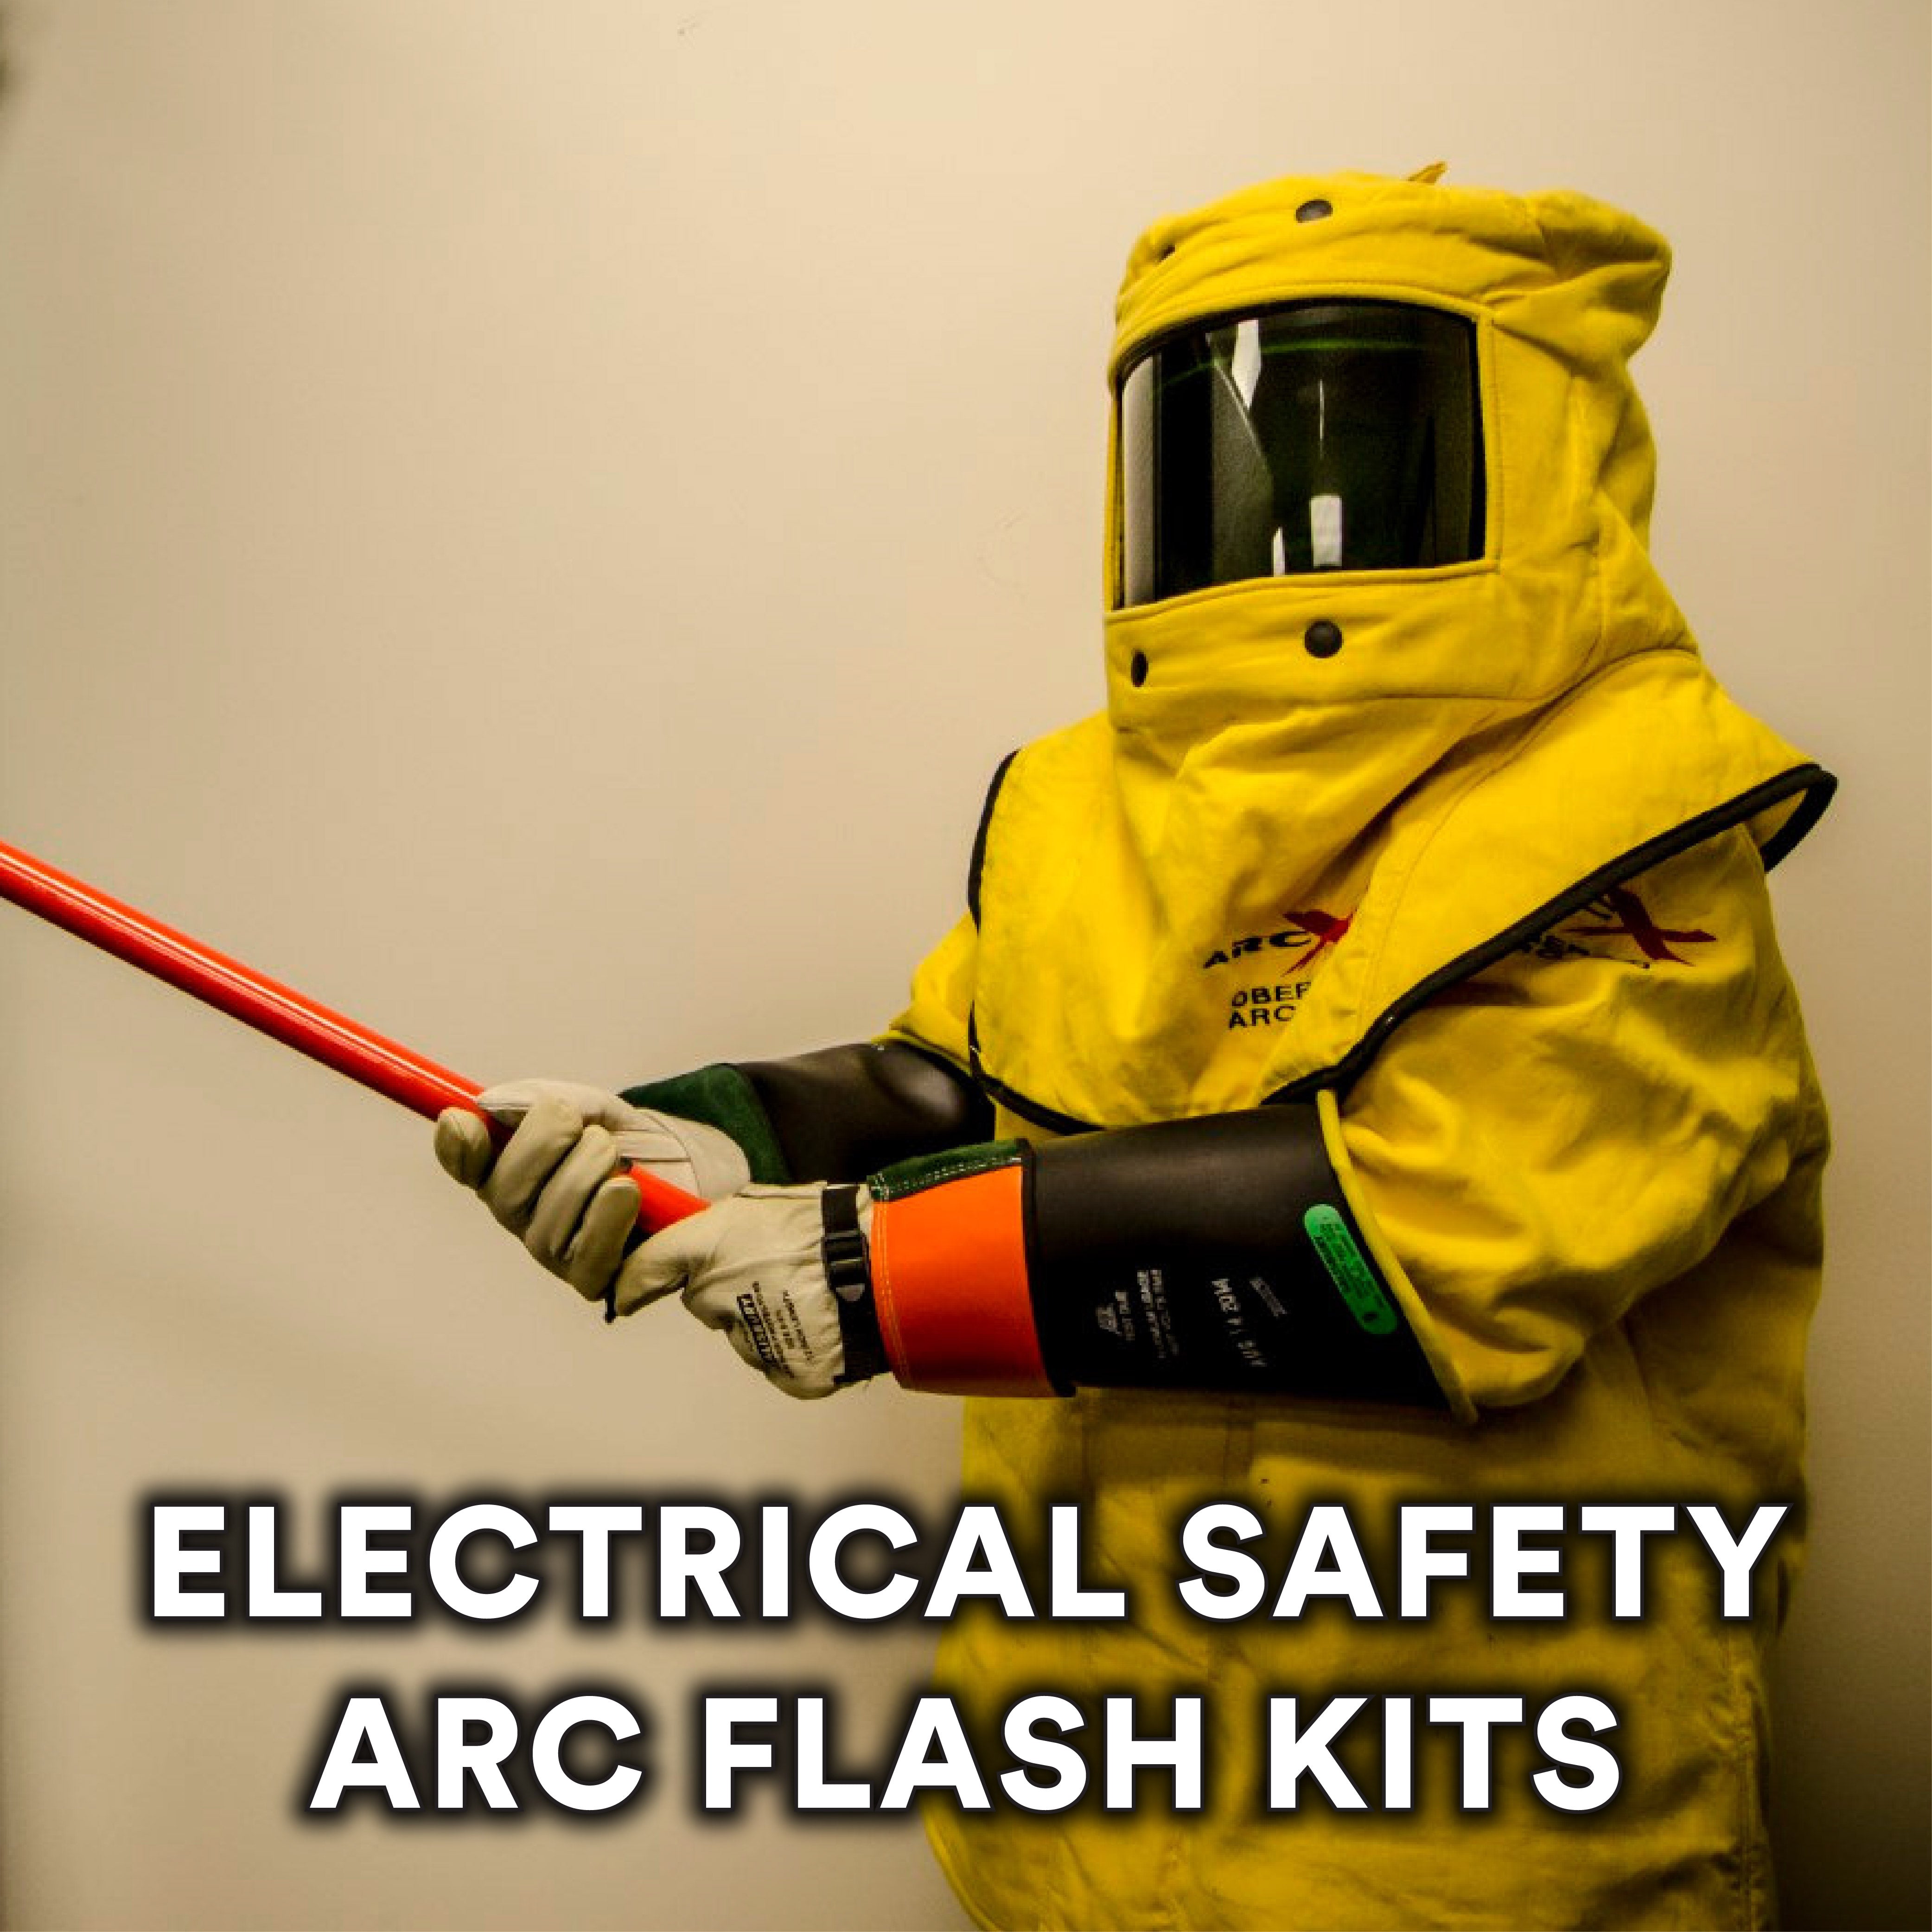 Electrical Safety Arc Flash Kits